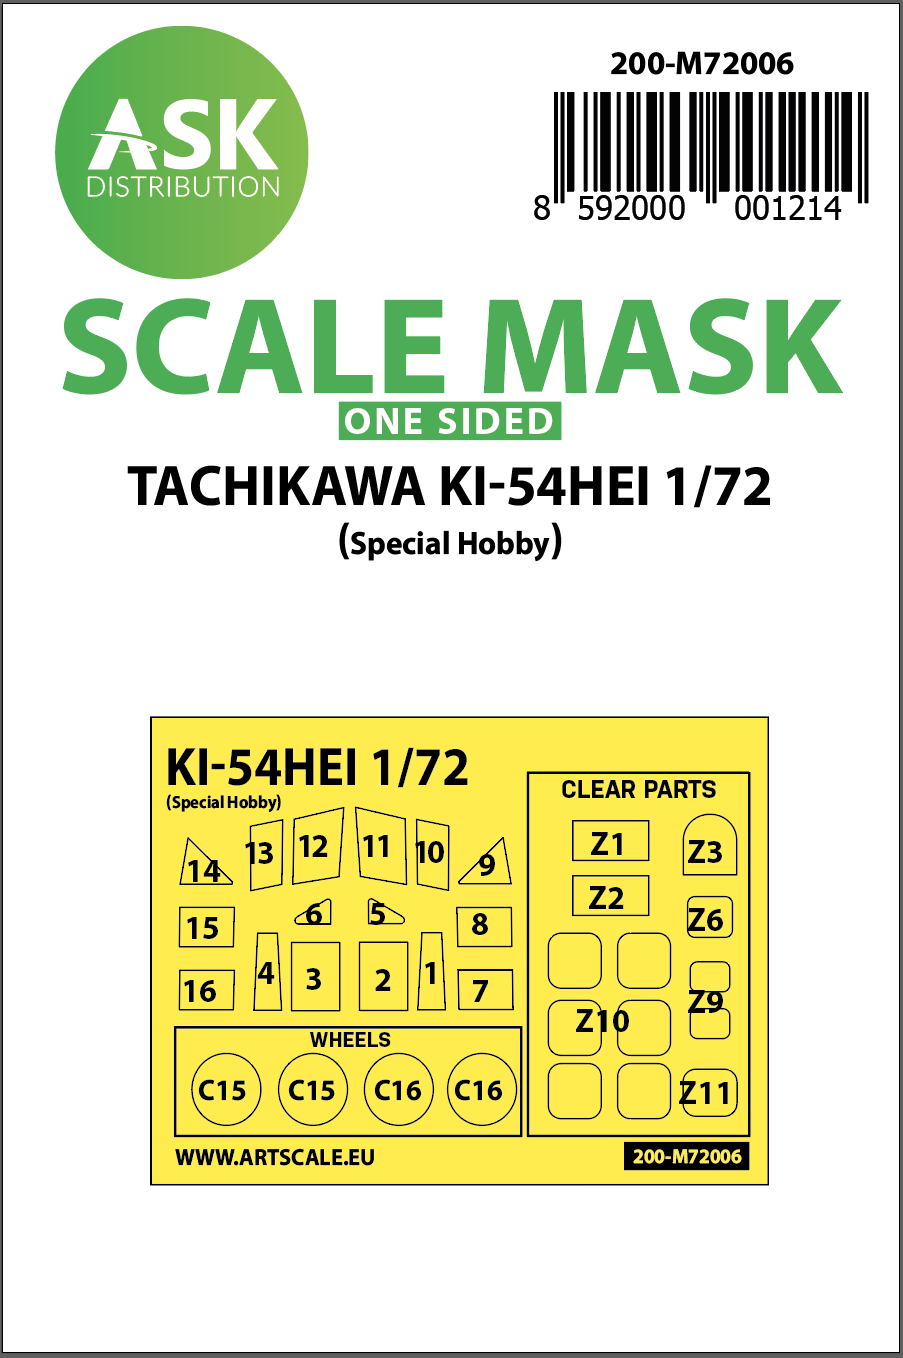 1/72 Tachikawa Ki-54HEI one-sided painting mask for Special Hobby